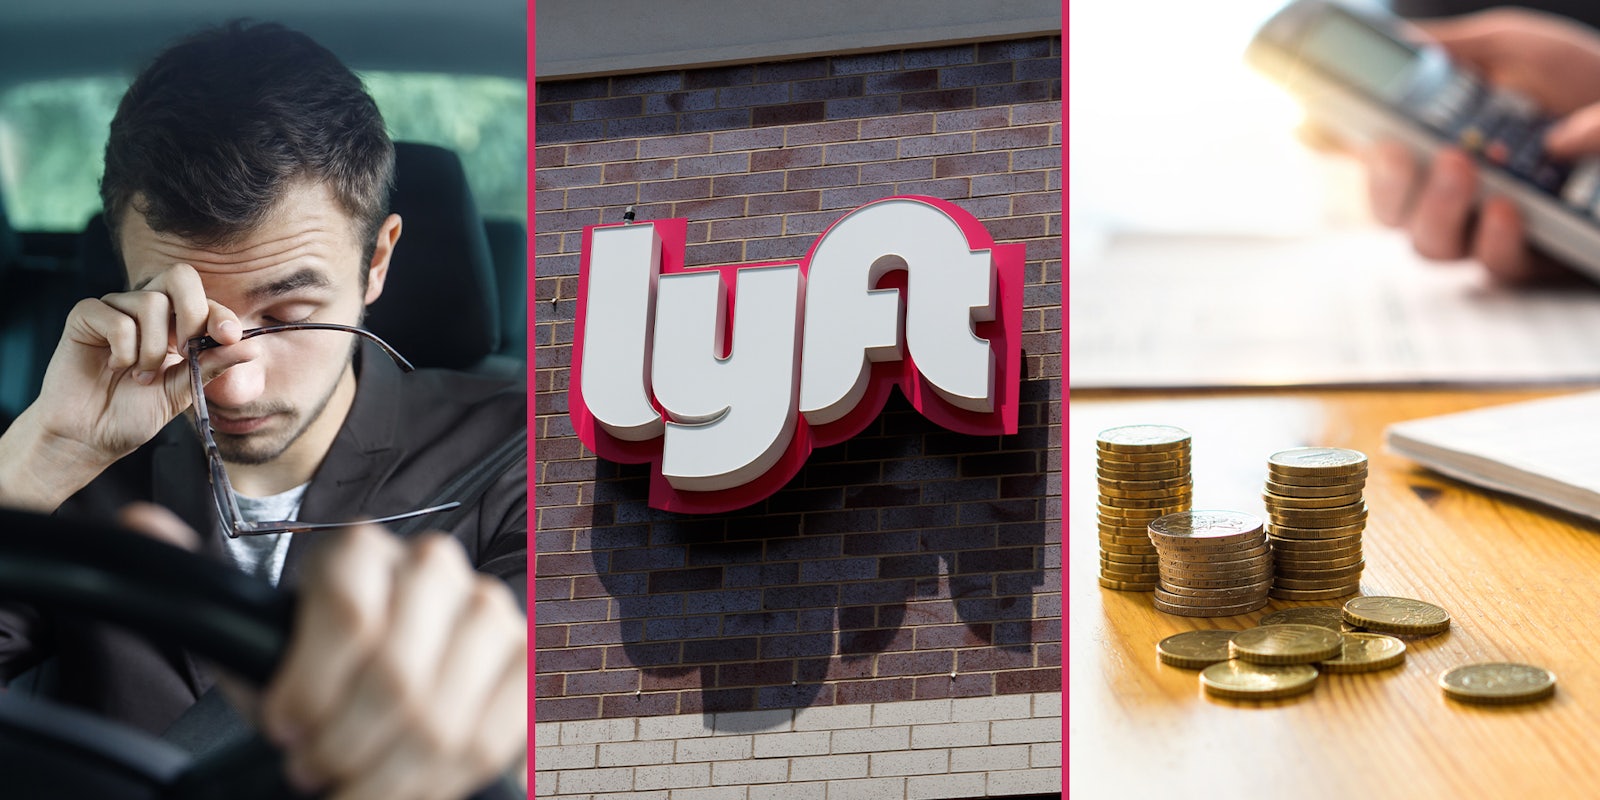 Lyft driver shows how much he actually earned on a $48 ride